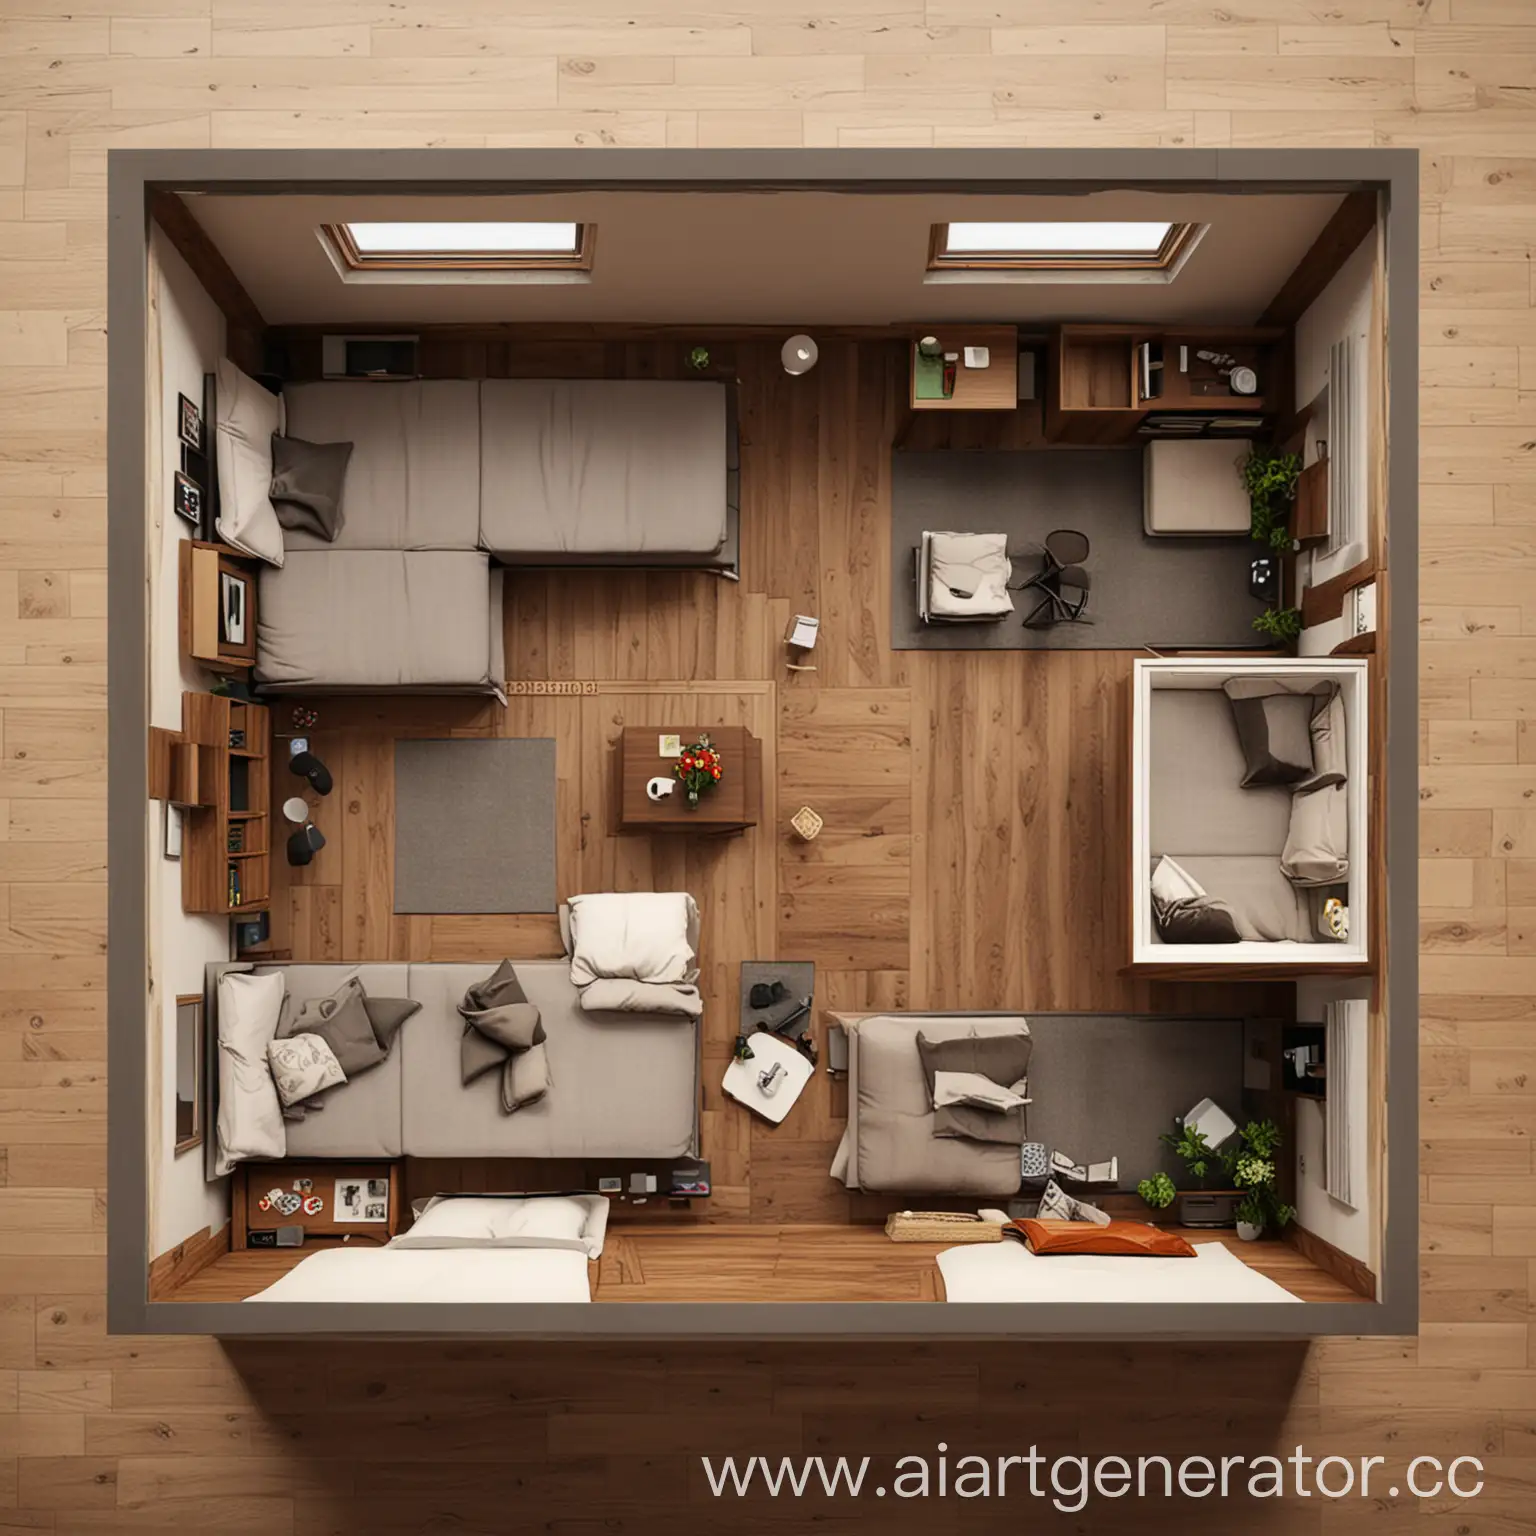 Top-View-Room-Design-with-Modern-Furniture-Layout